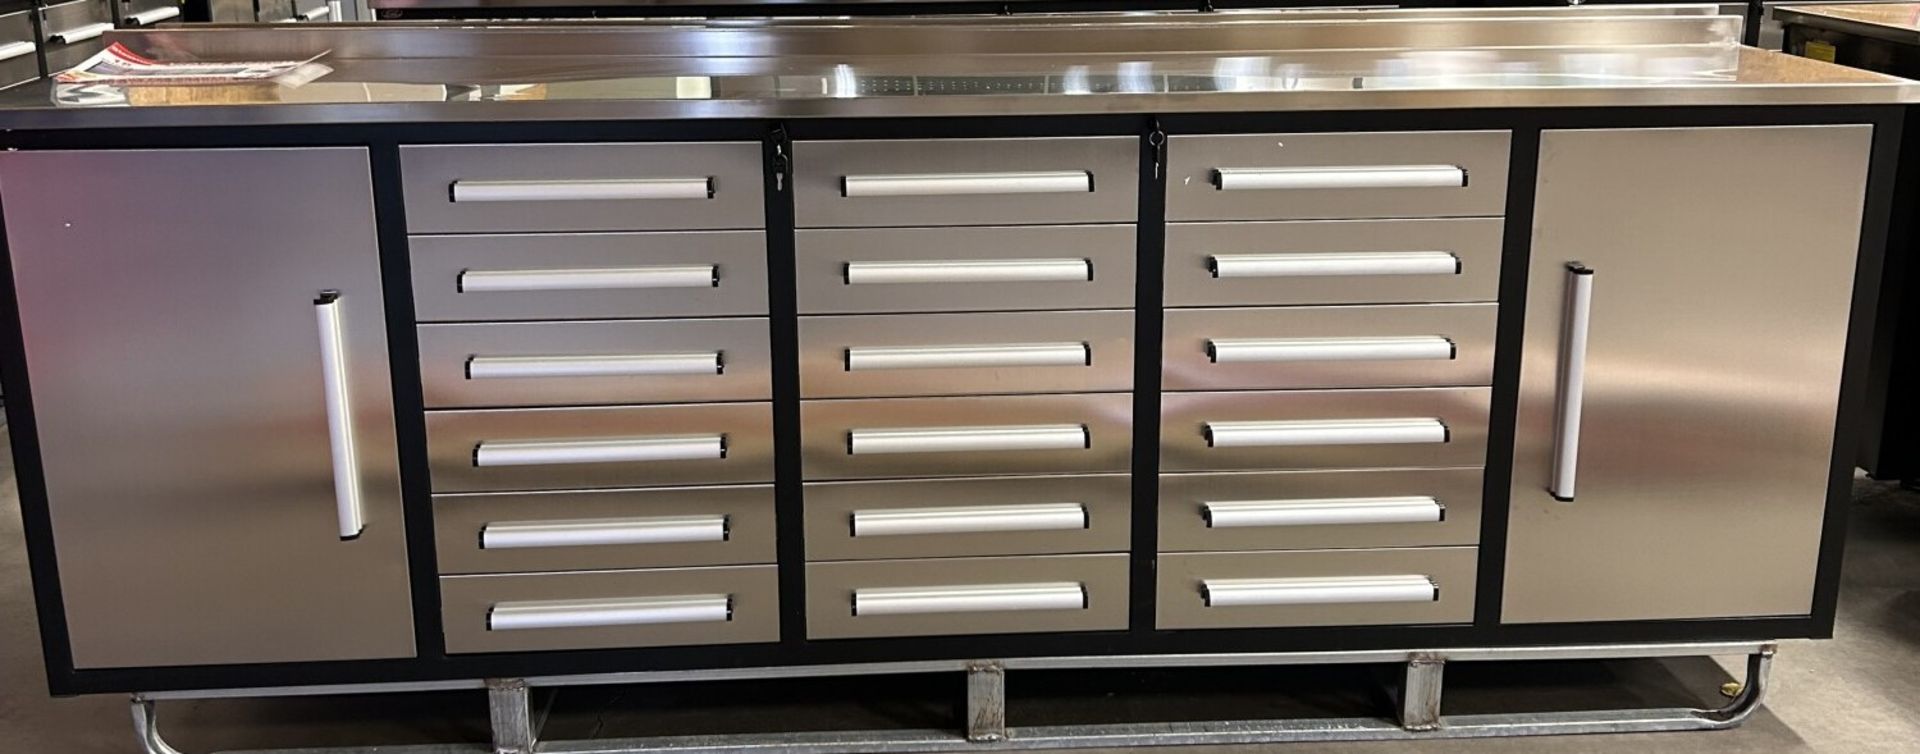 UNUSED 2024 STEELMAN 10 FT WORK BENCH WITH 18 DRAWERS & 2 CABINETS. PACKED IN PLASTICS. DRAWERS WITH